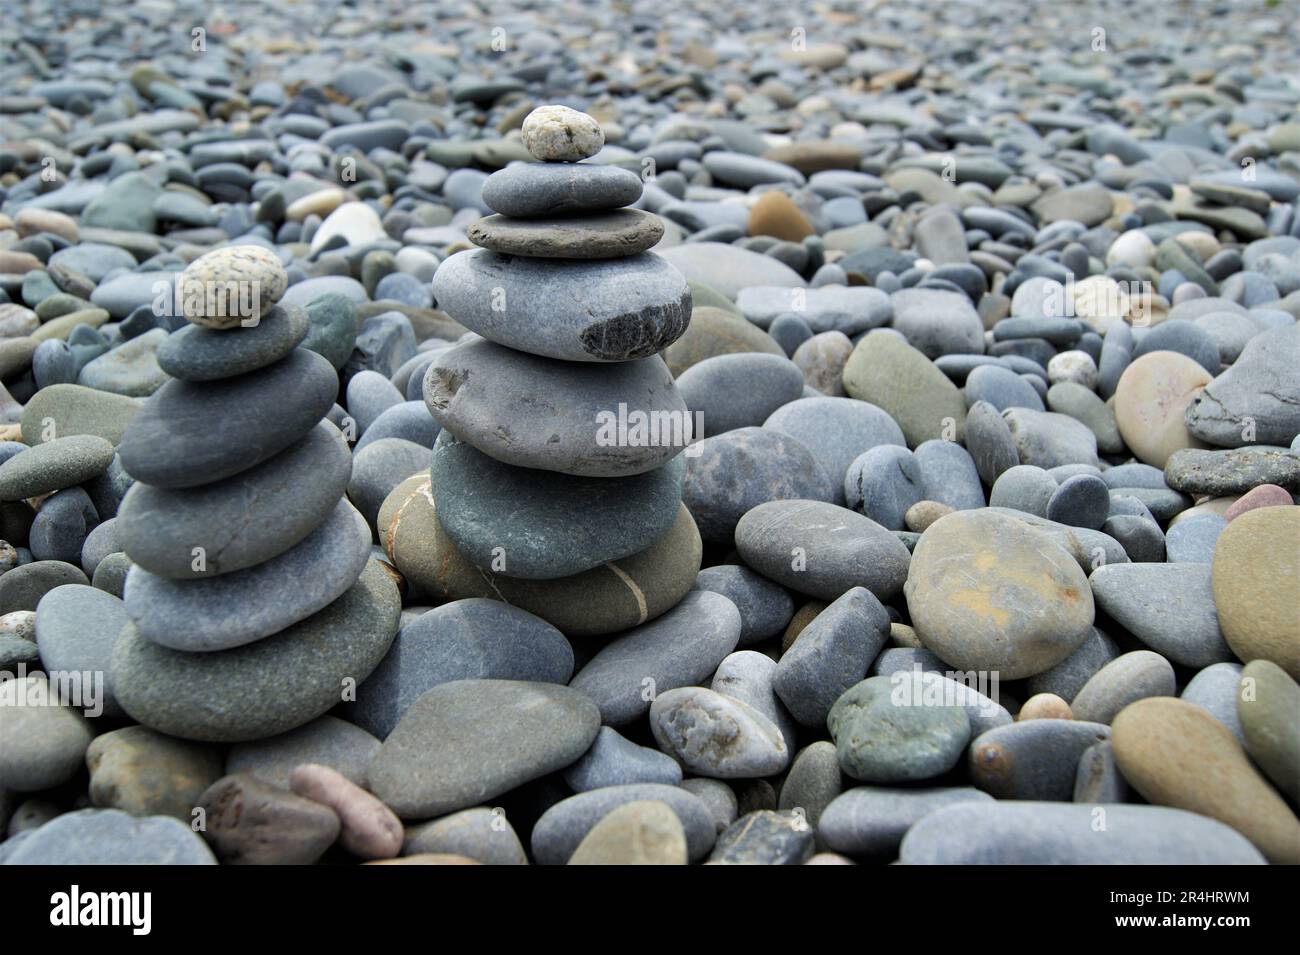 Two Zen towers on a stony beach. Towers made of pebbles. Stock Photo